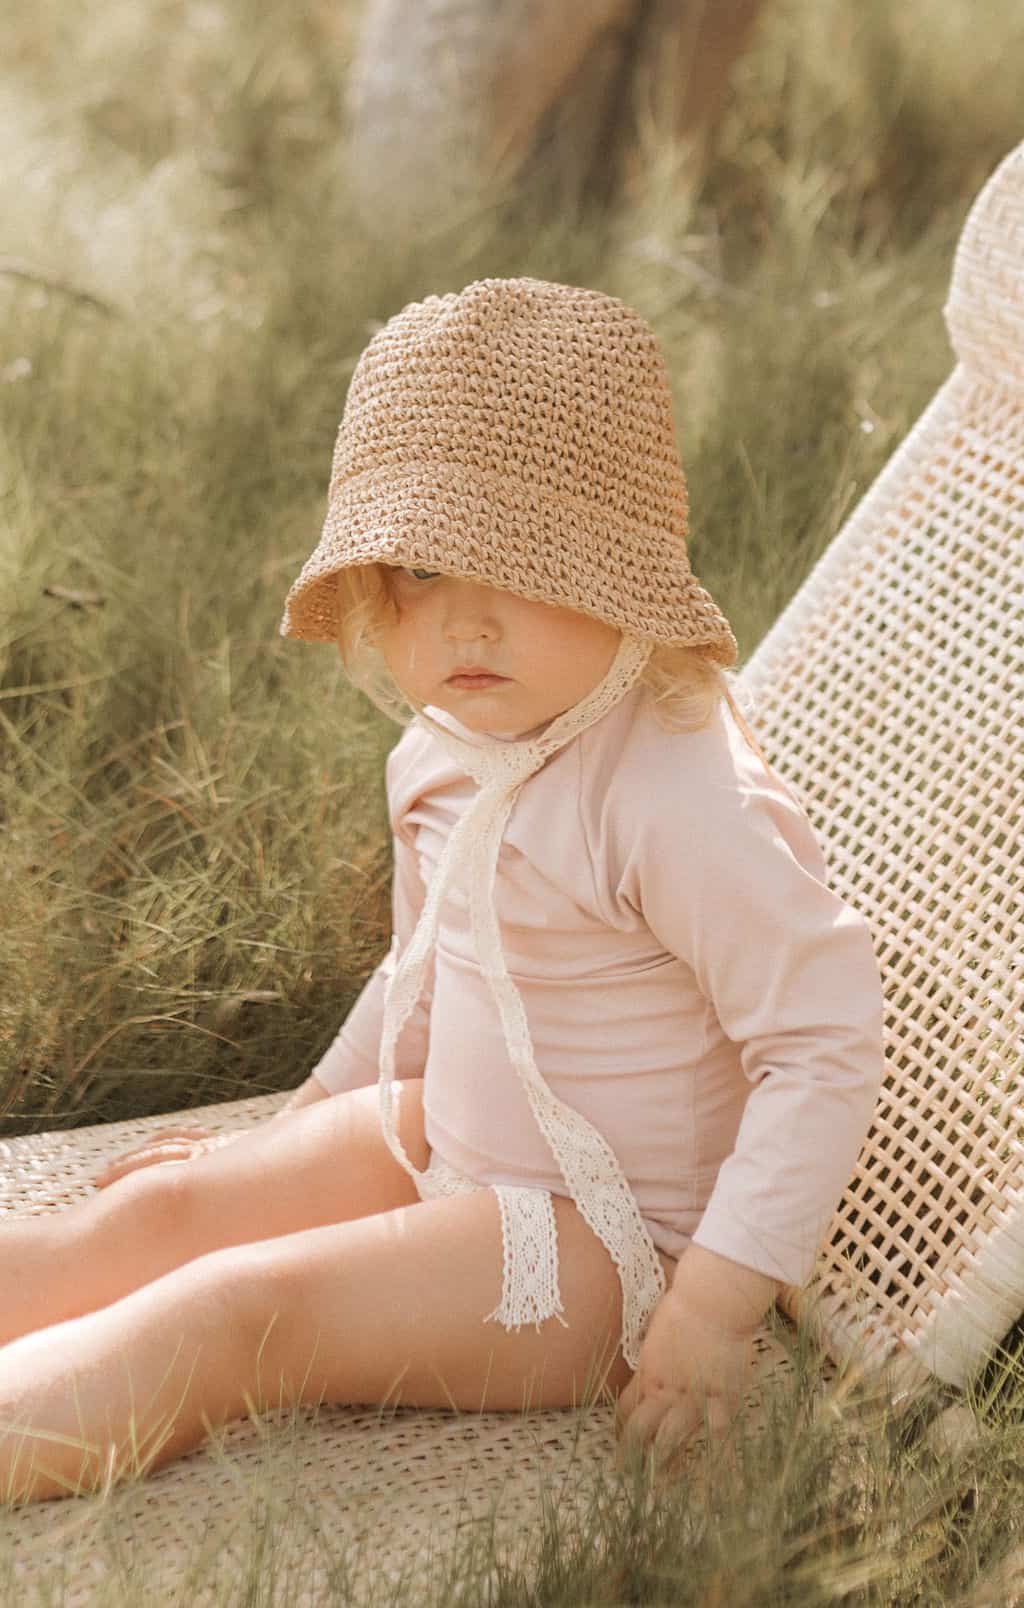 A baby is sitting on a wicker chair in the sustainable swimwear.